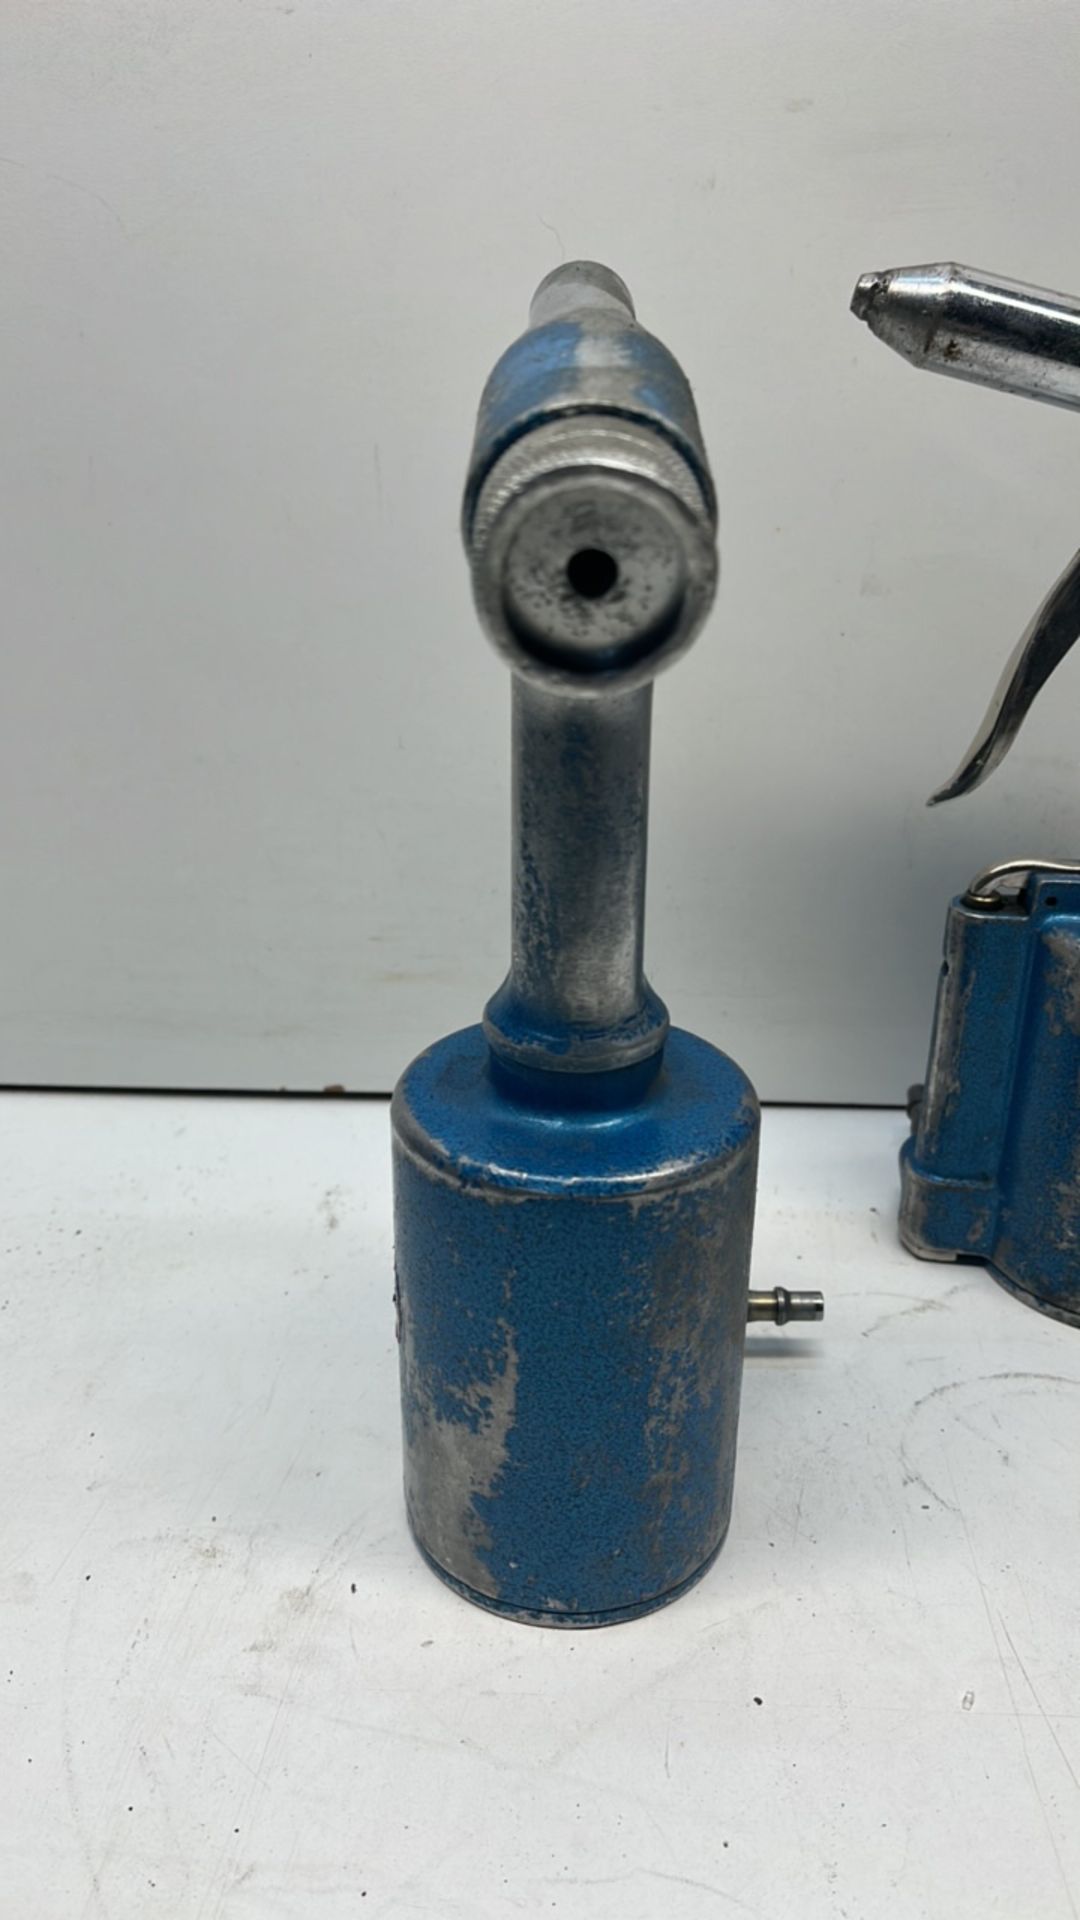 2 x Unbranded Air Rivet Guns *As Pictured* - Image 2 of 3